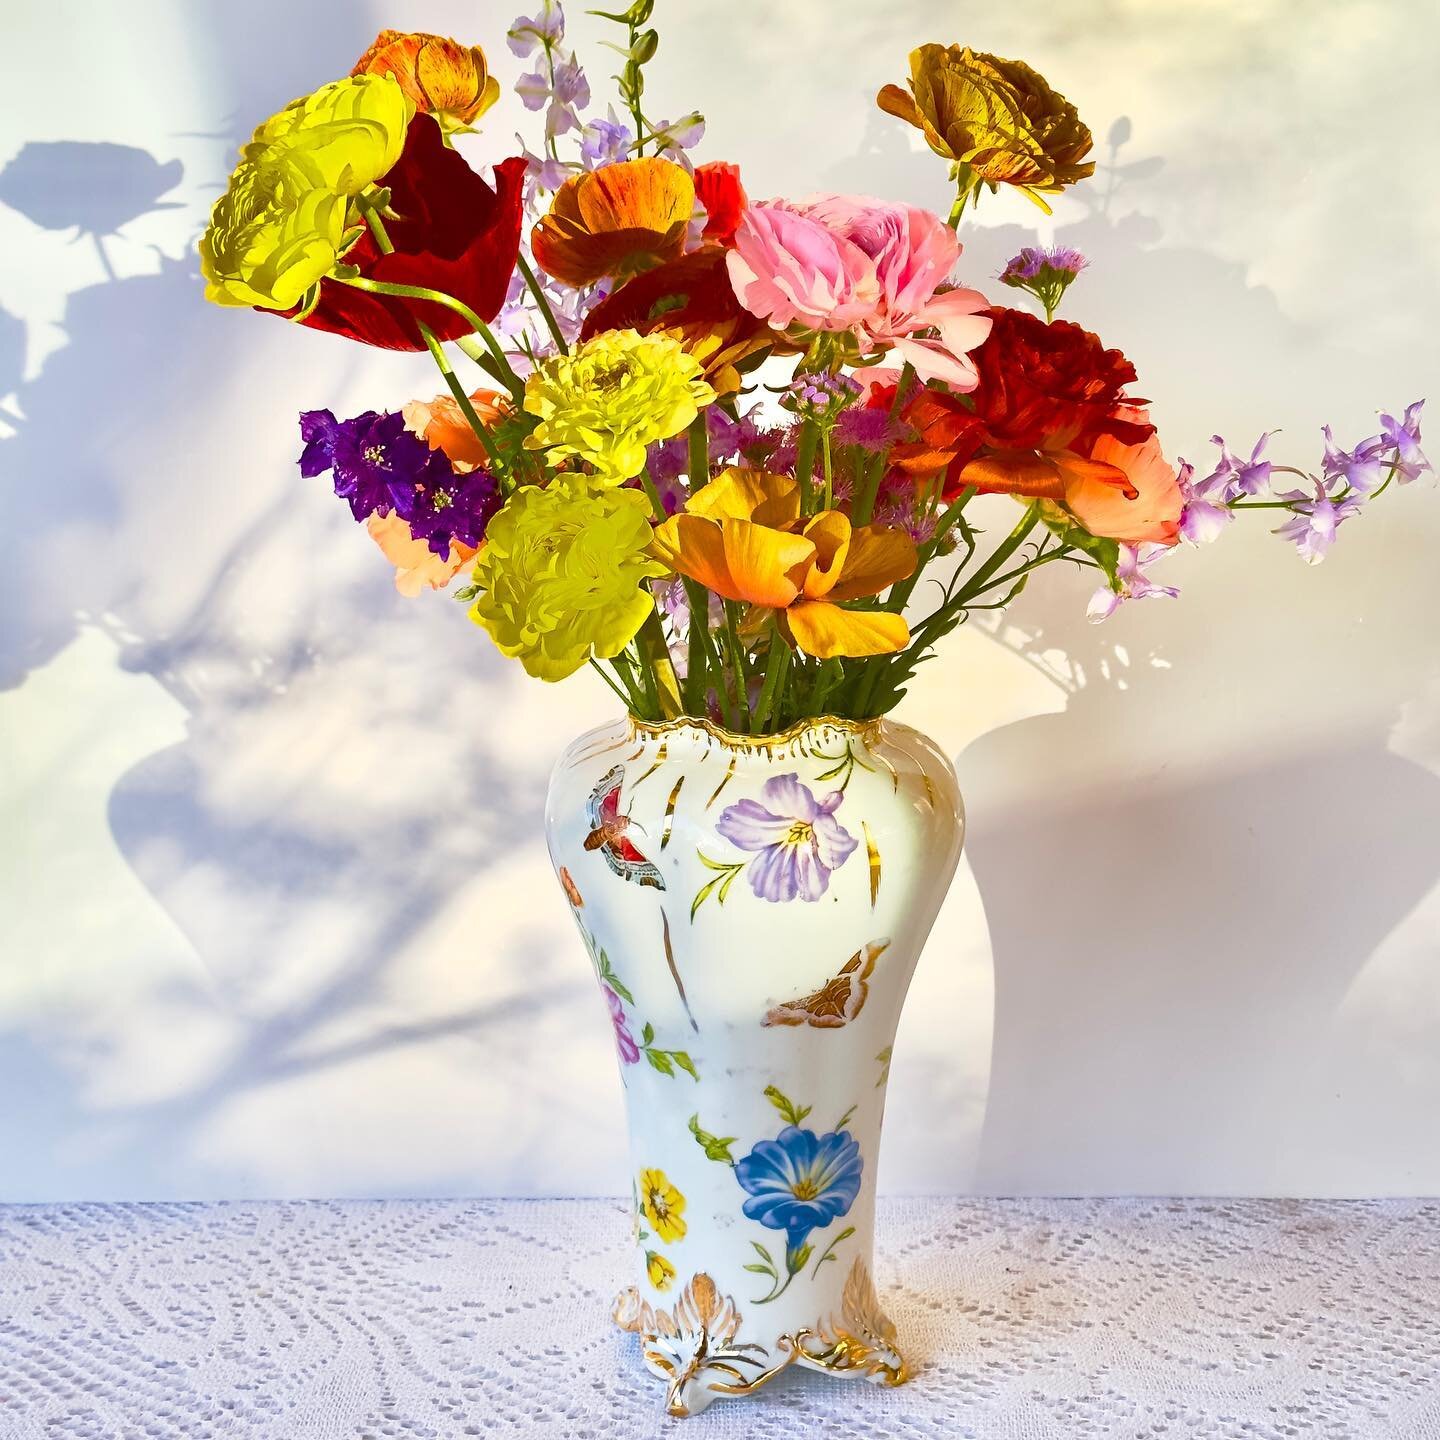 The early morning sunlight captures the purity of porcelain with 24k hand painted gold  #bridalregistry #tablescapes #tablesetting  #porcelain #vases  #flowervases